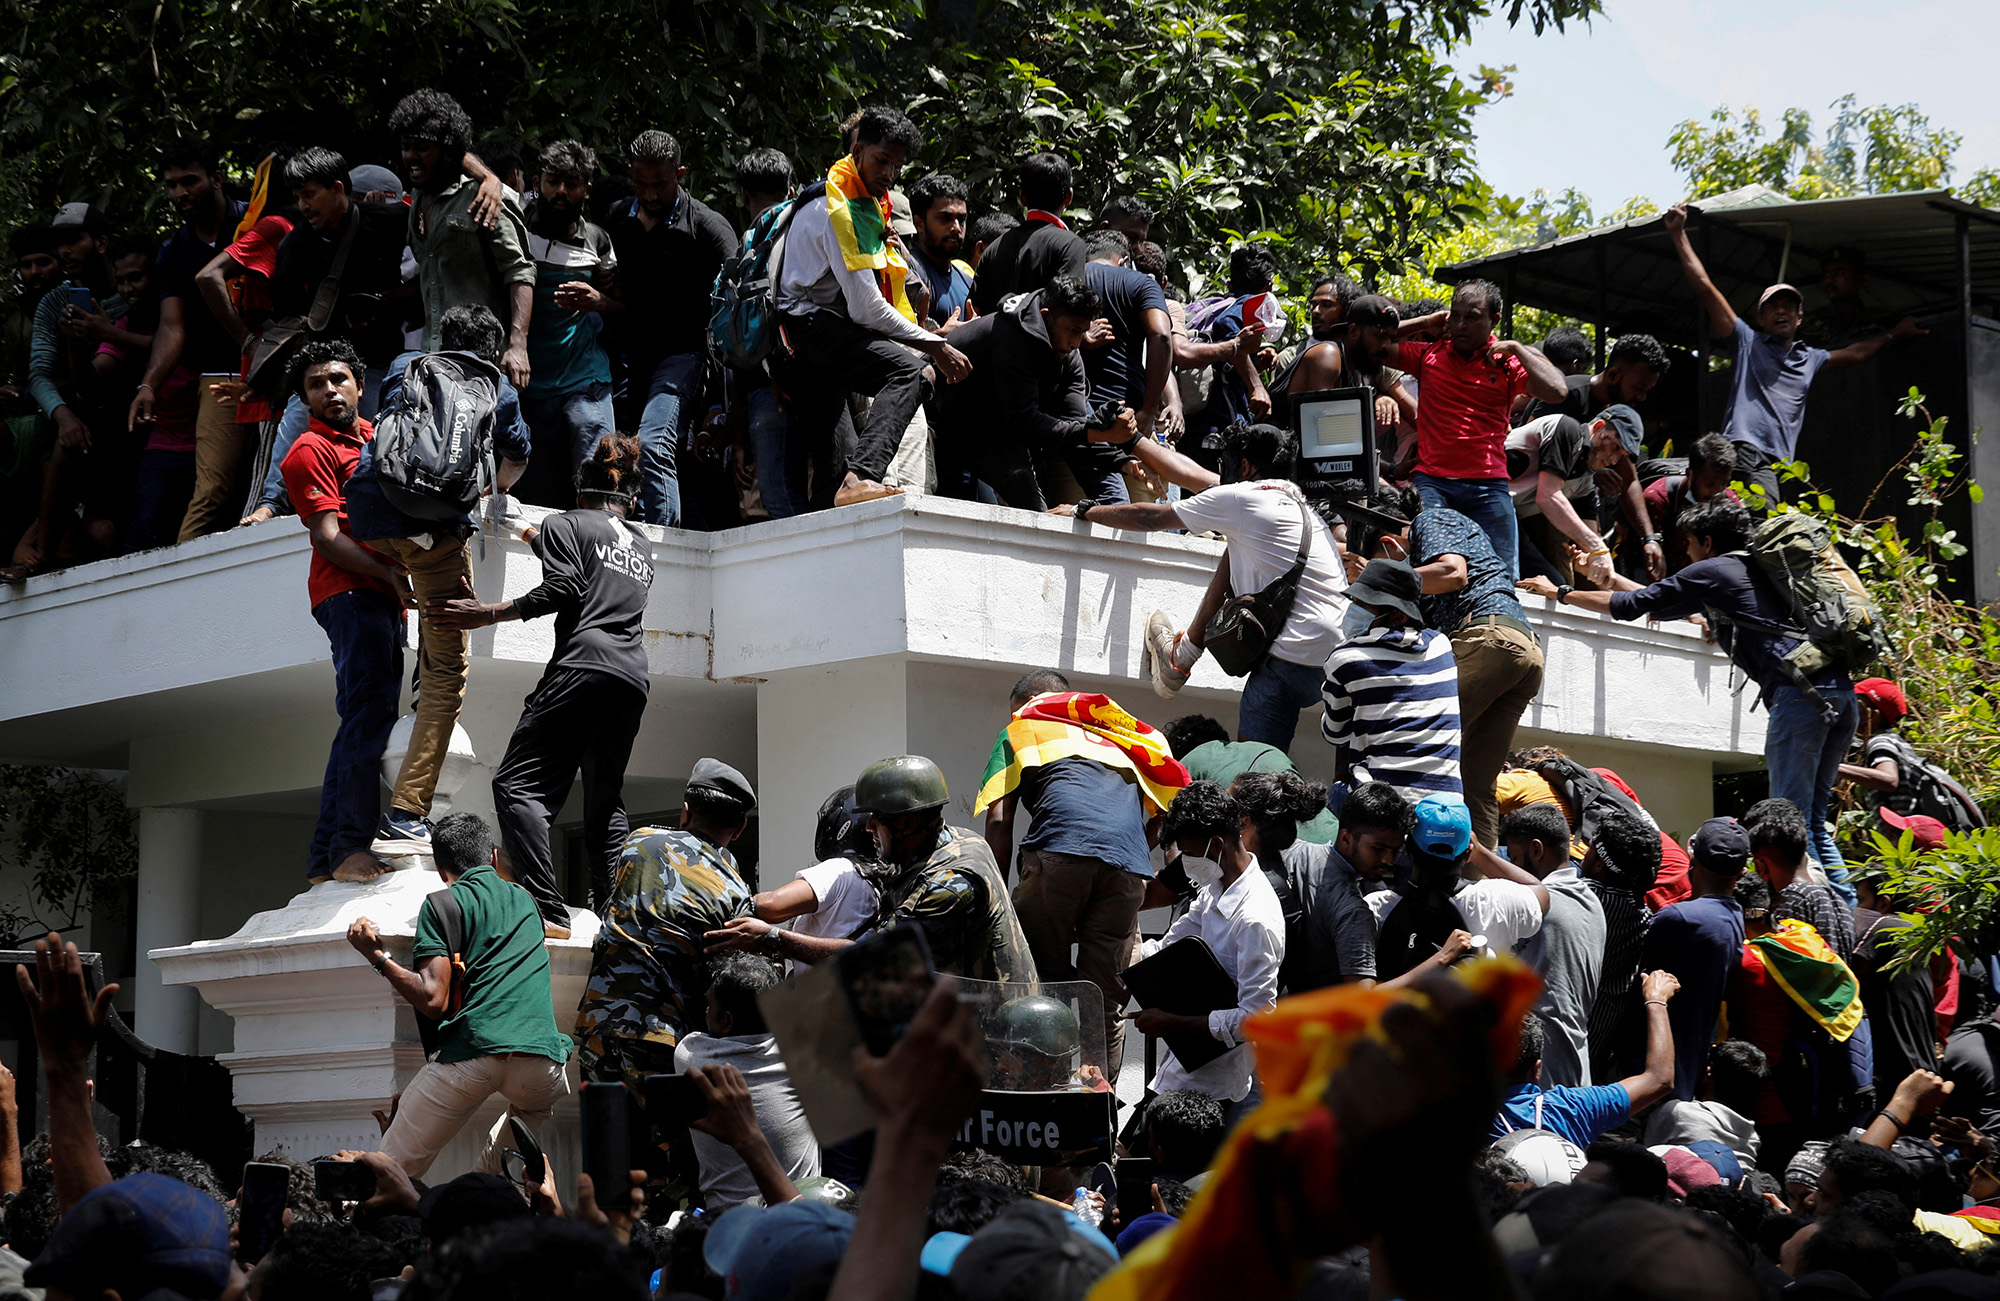 Protesters climb the front gate of Sri Lanka's Prime Minister Ranil Wickremesinghe's office during a protest in Colombo, Sri Lanka, on July 13.